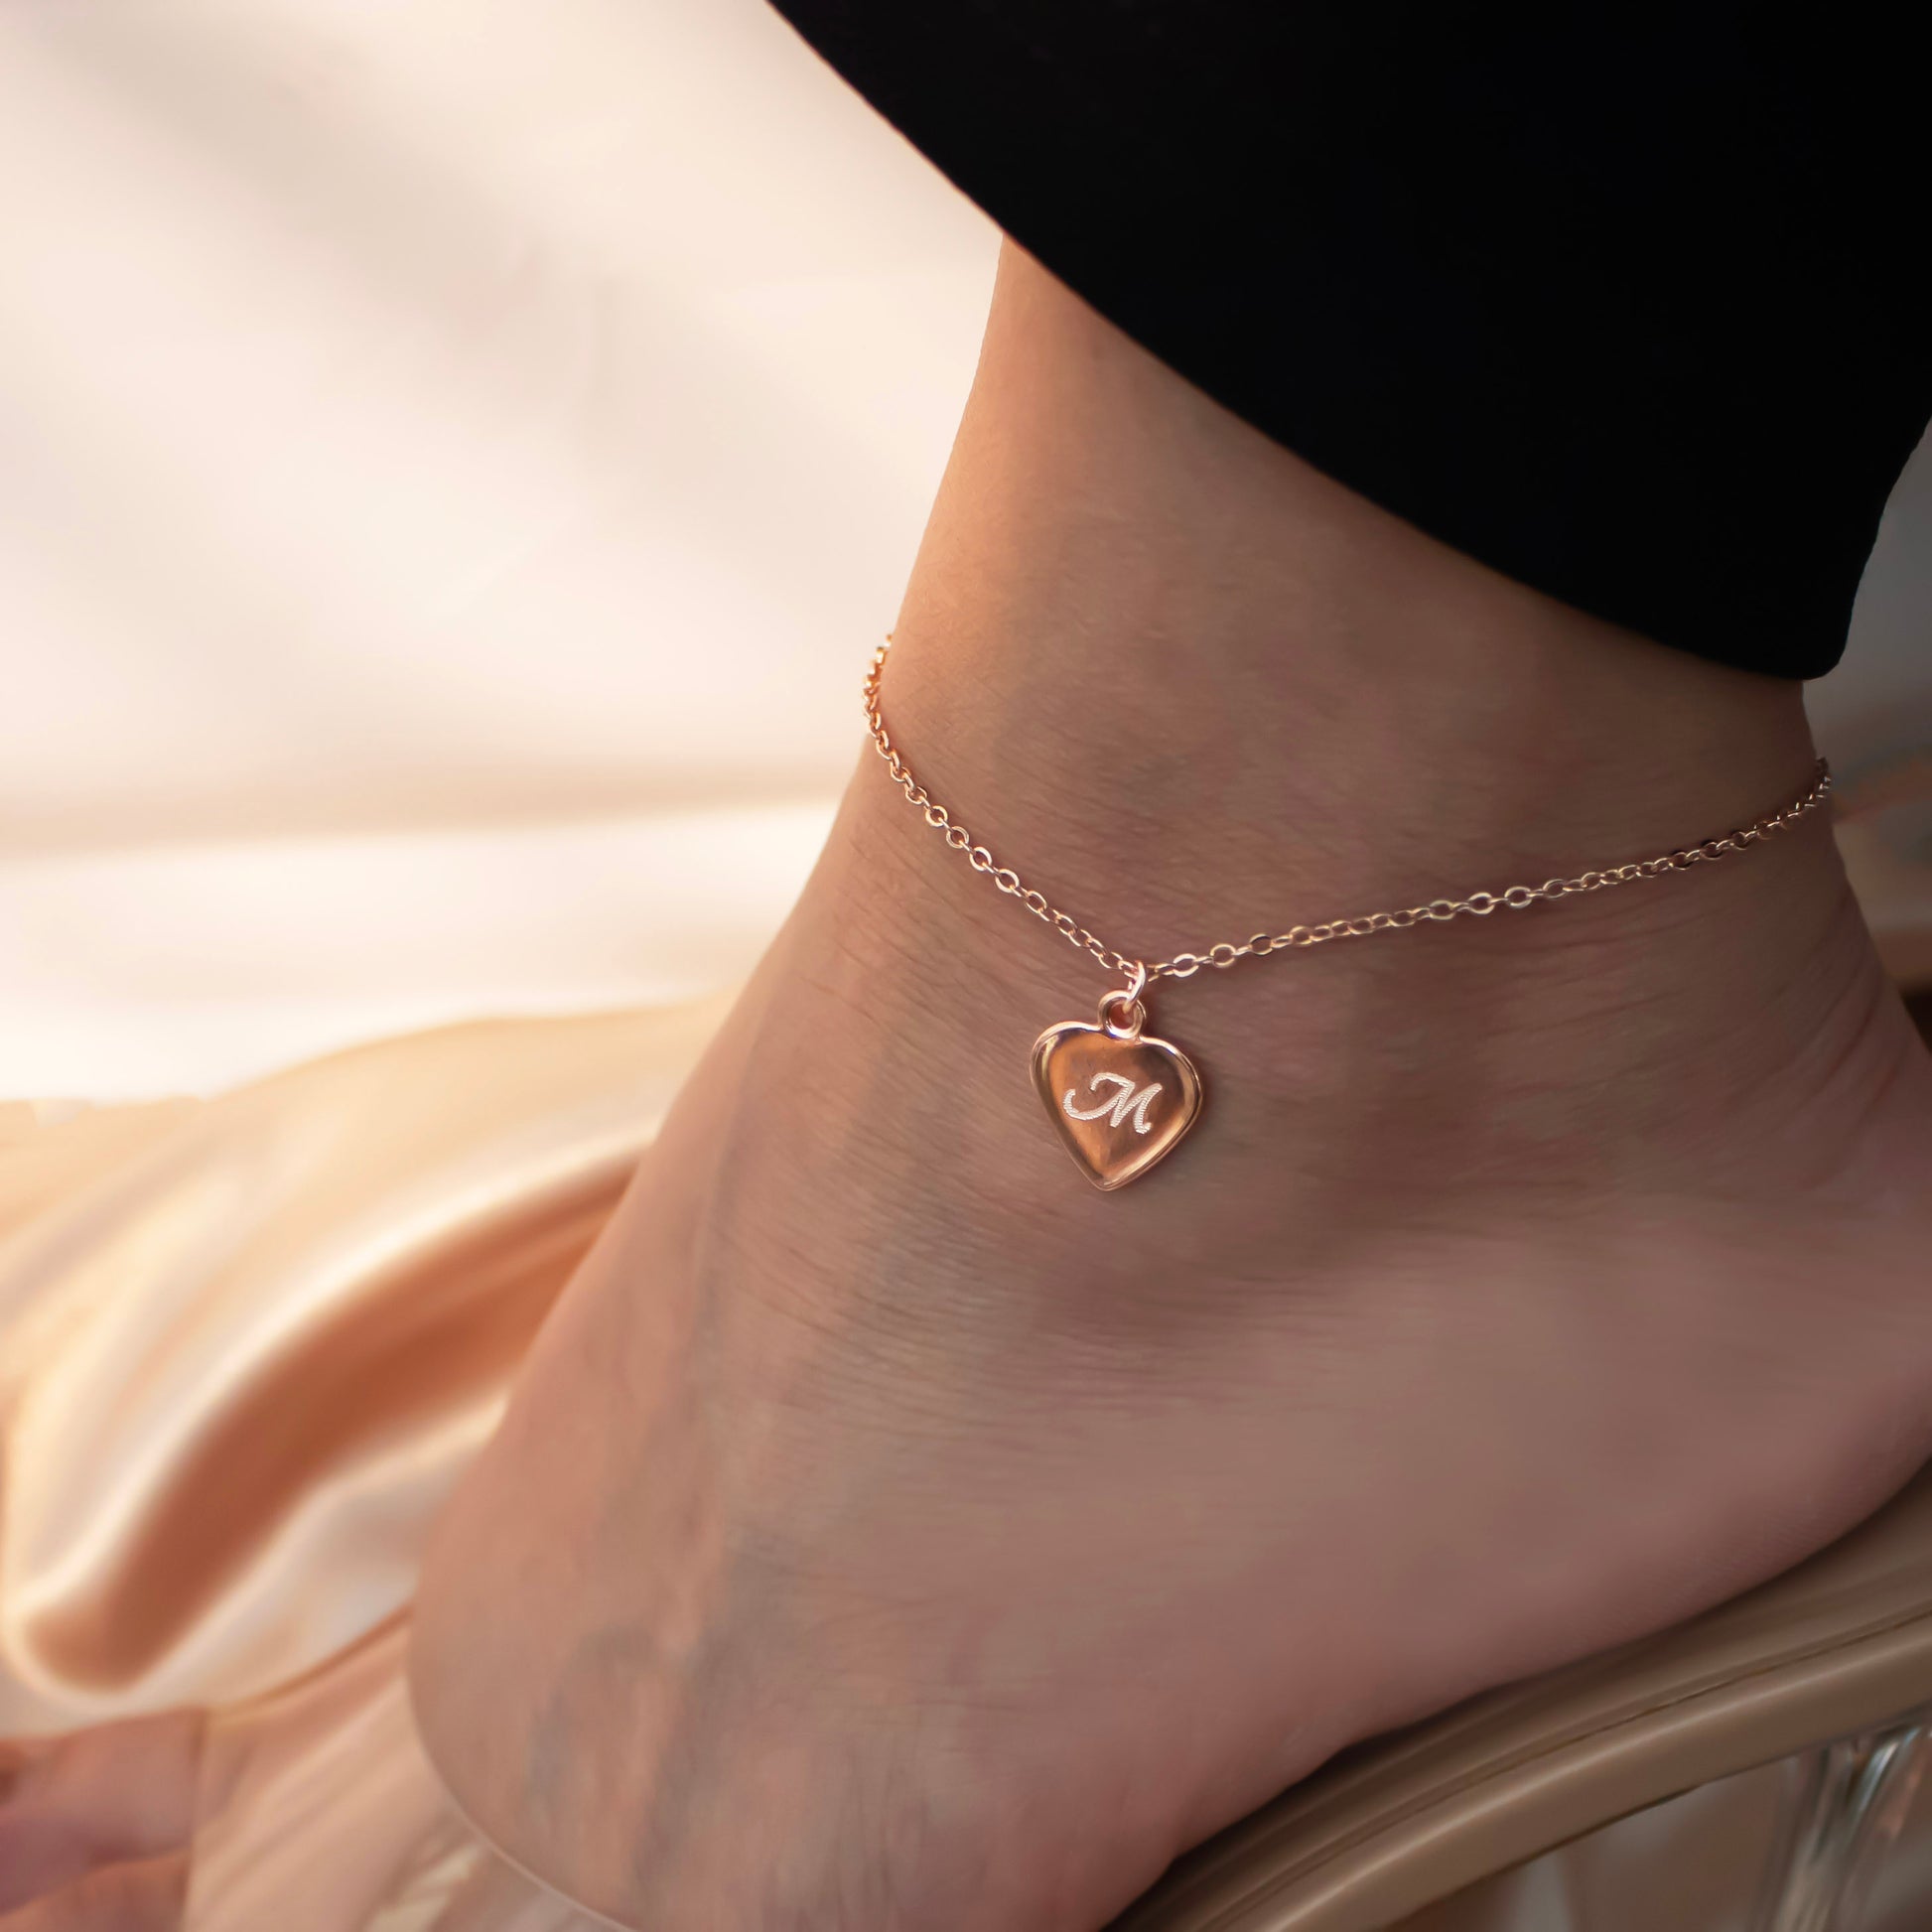 Buy Dainty 16K Gold Heart Anklet for Summer at Petite Boutique